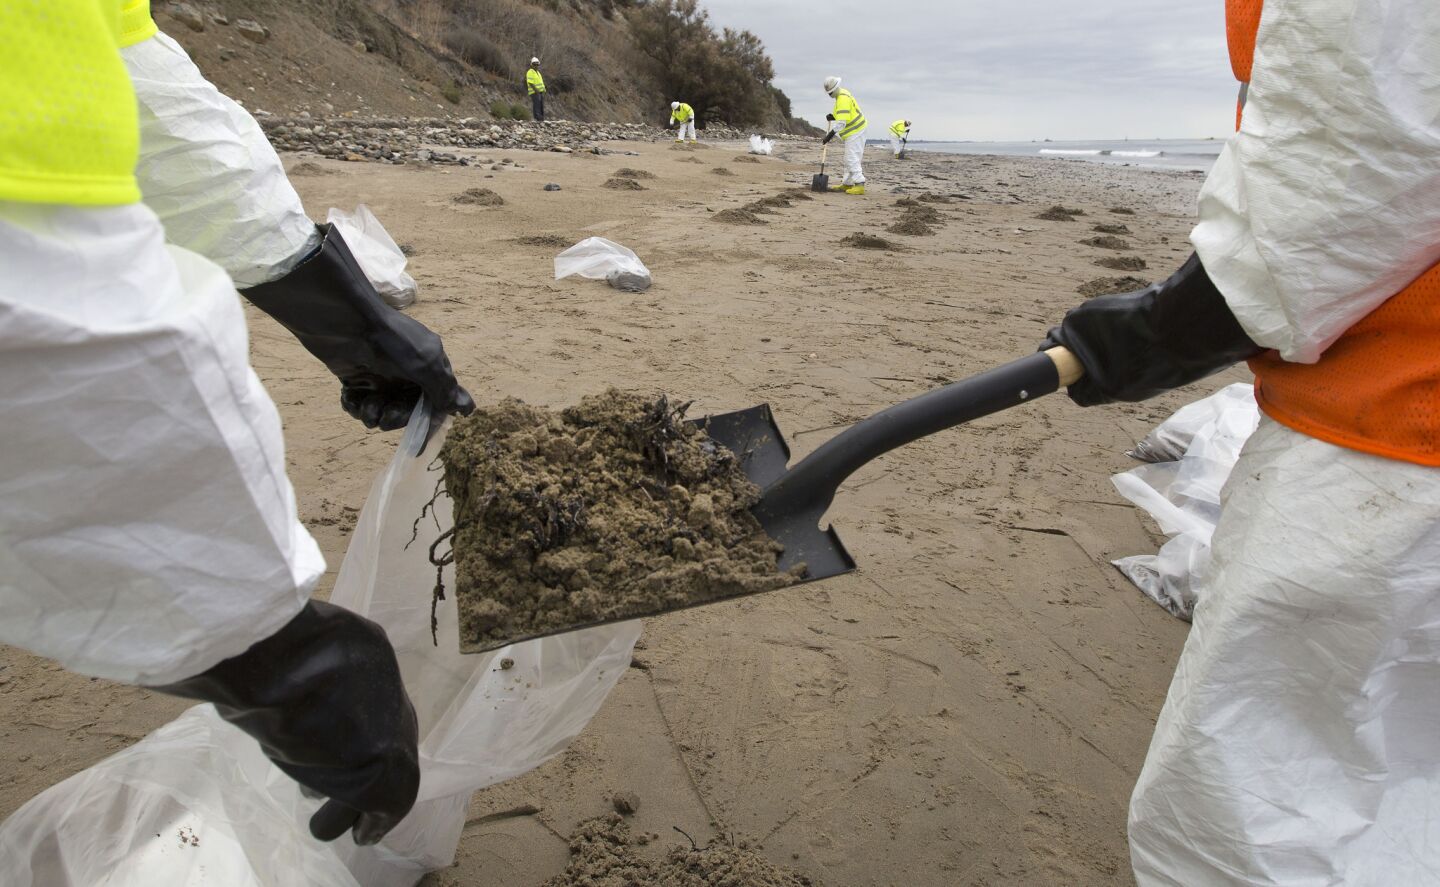 Patriot Environmental Services employees bag oil-contaminated sand on the shoreline at Refugio State Beach.